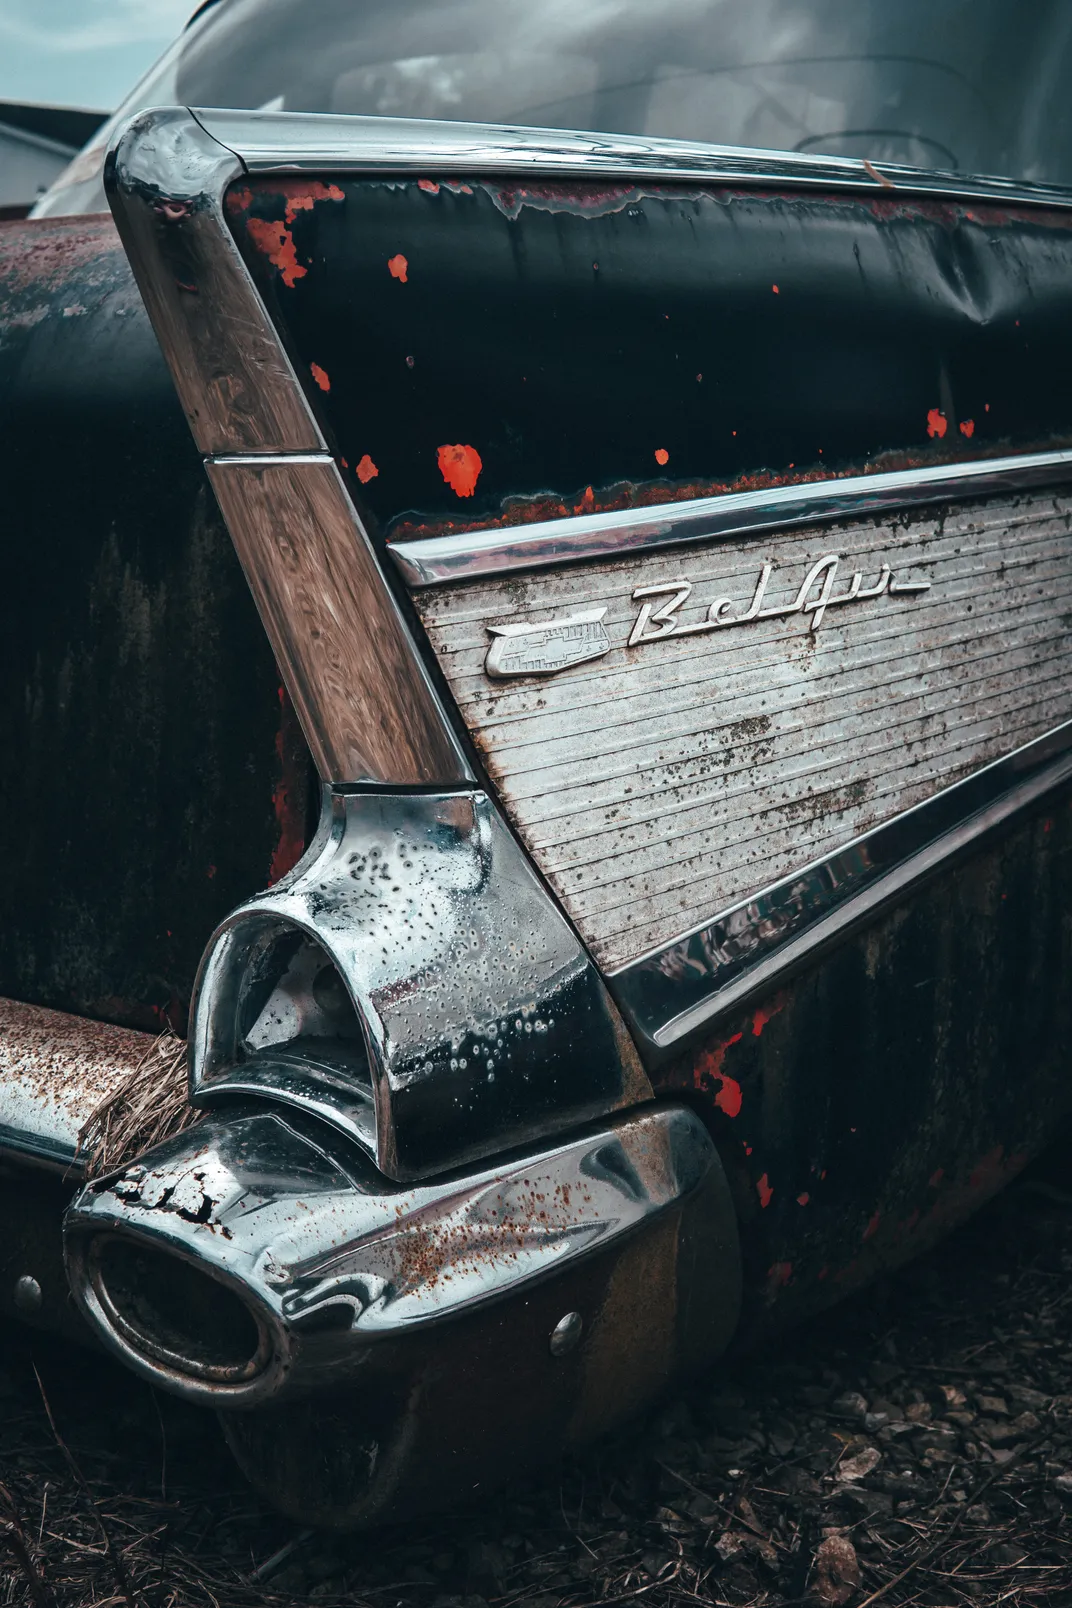 14 - Chipped paint and rust begin to take their toll on an abandoned 1957 Chevy Bel Air.